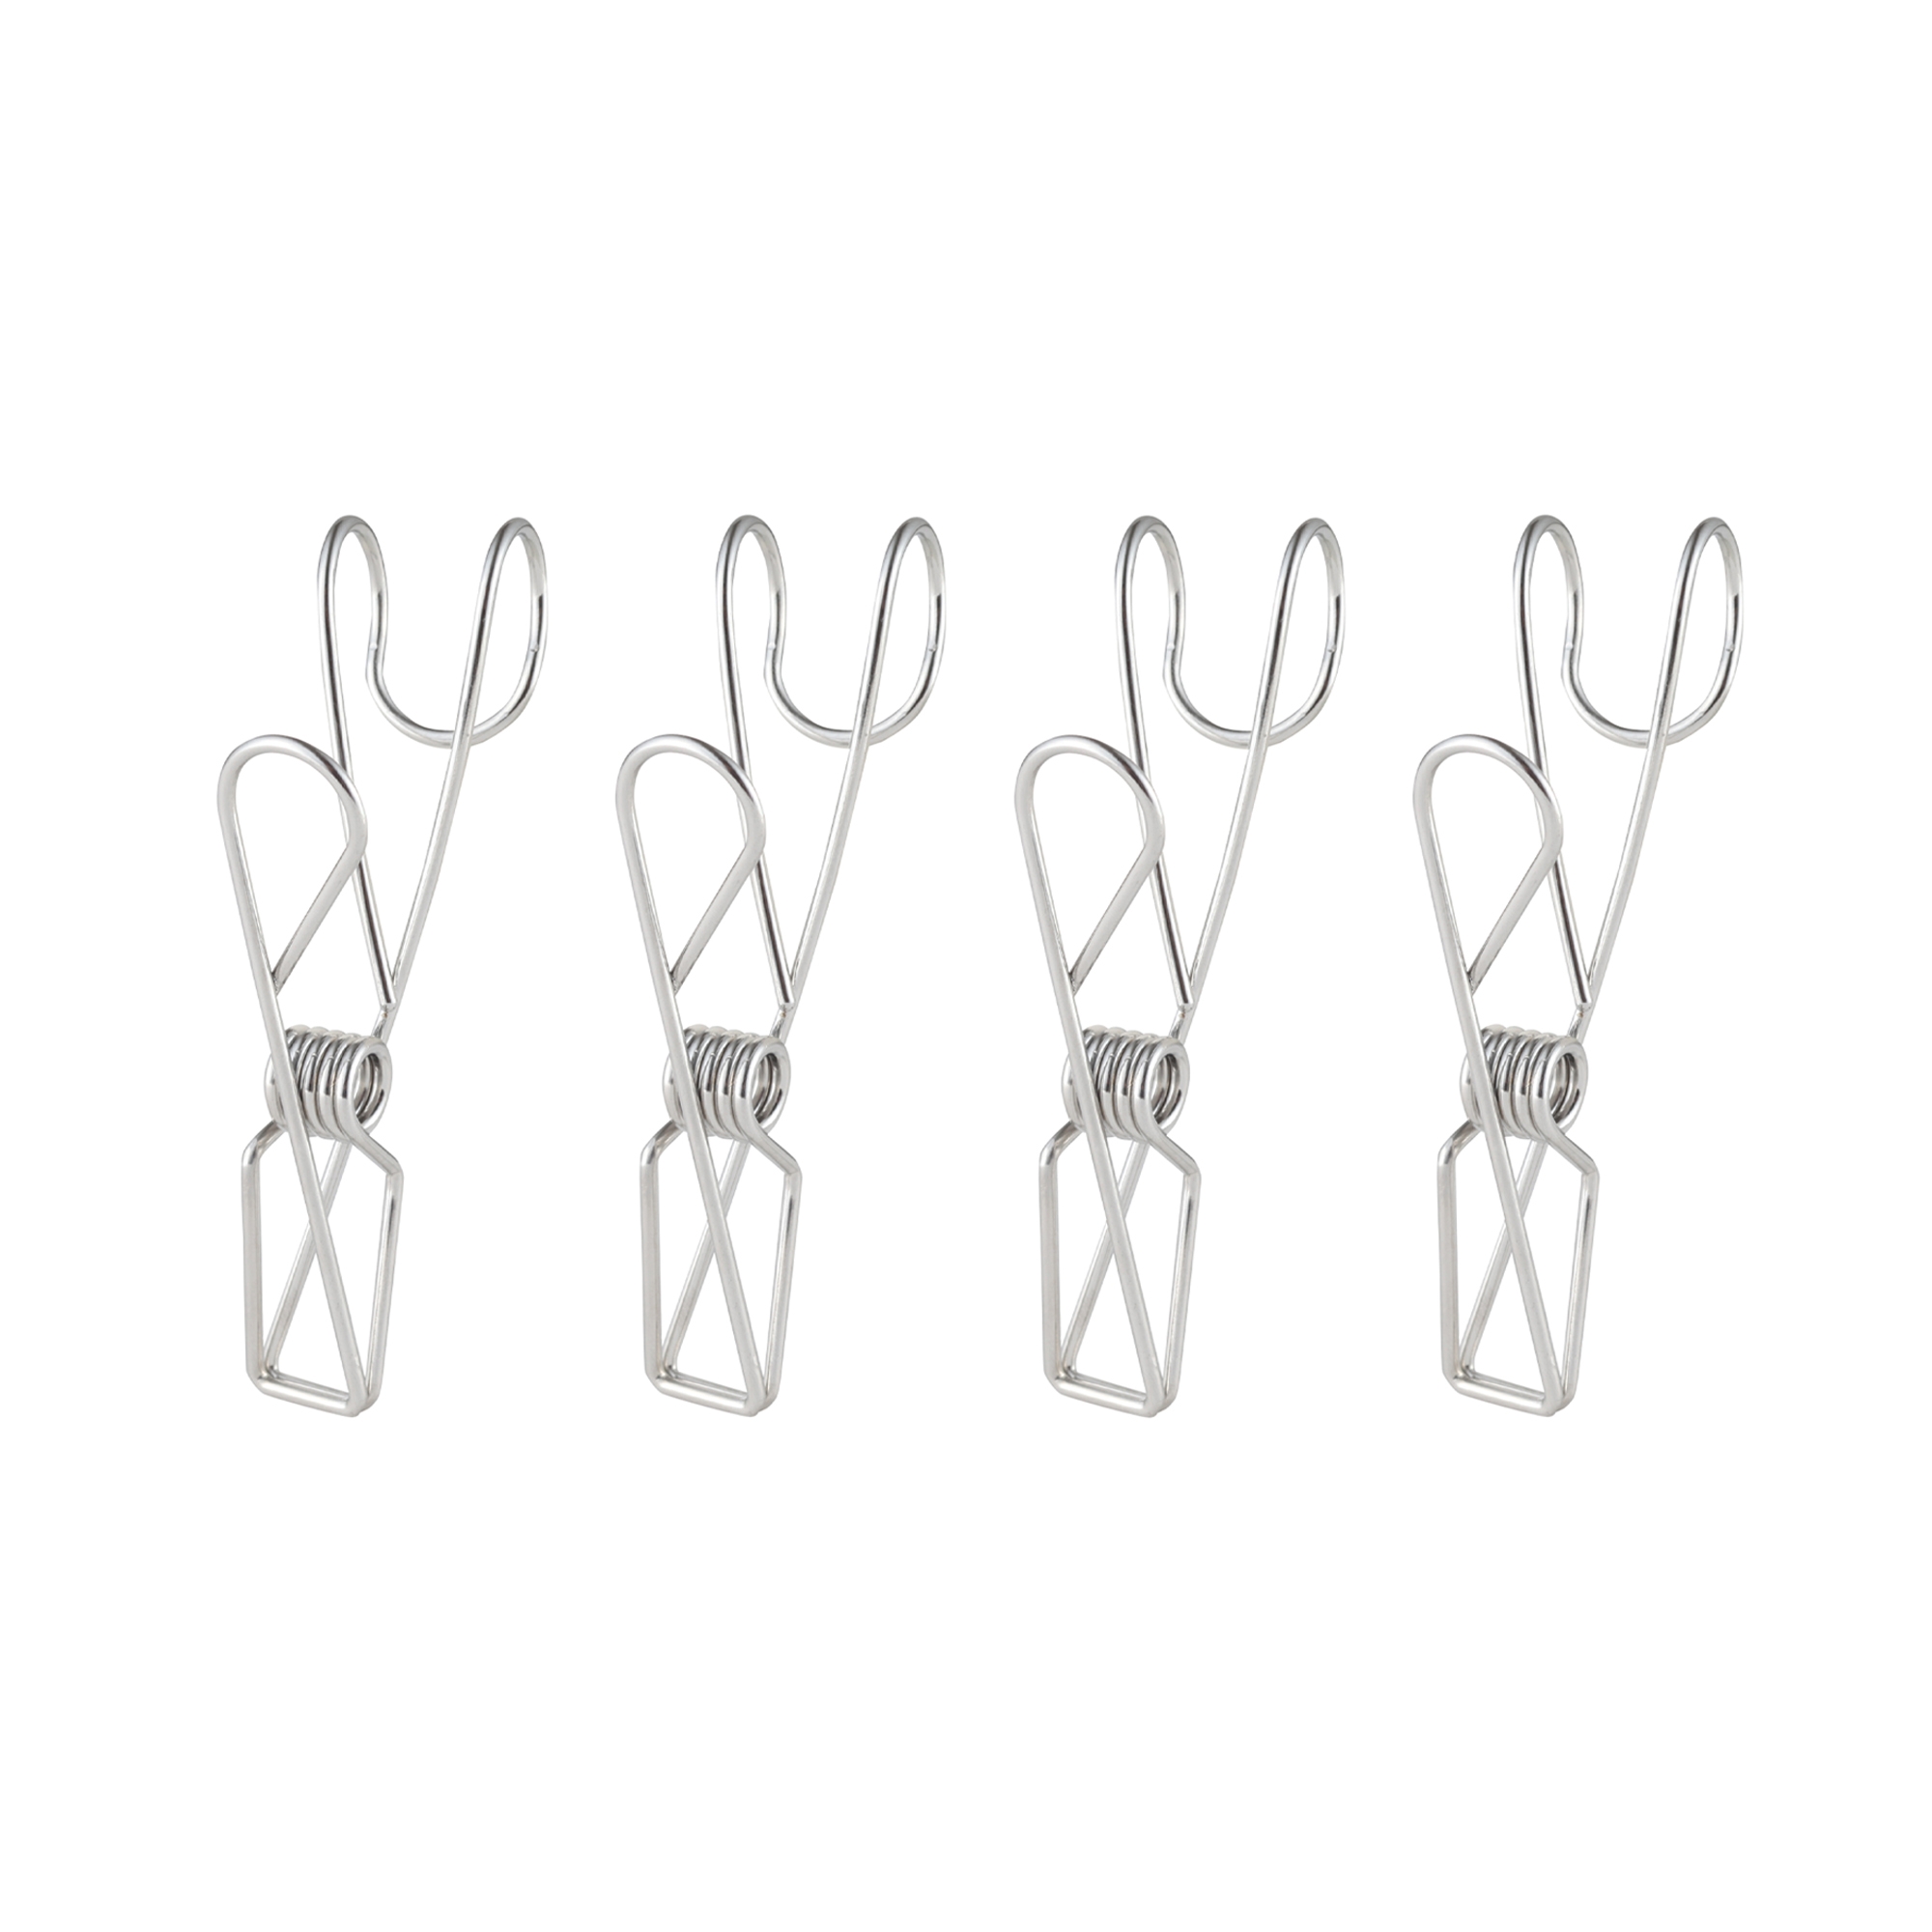 STAINLESS STEEL HOOKING WIRE CLIP